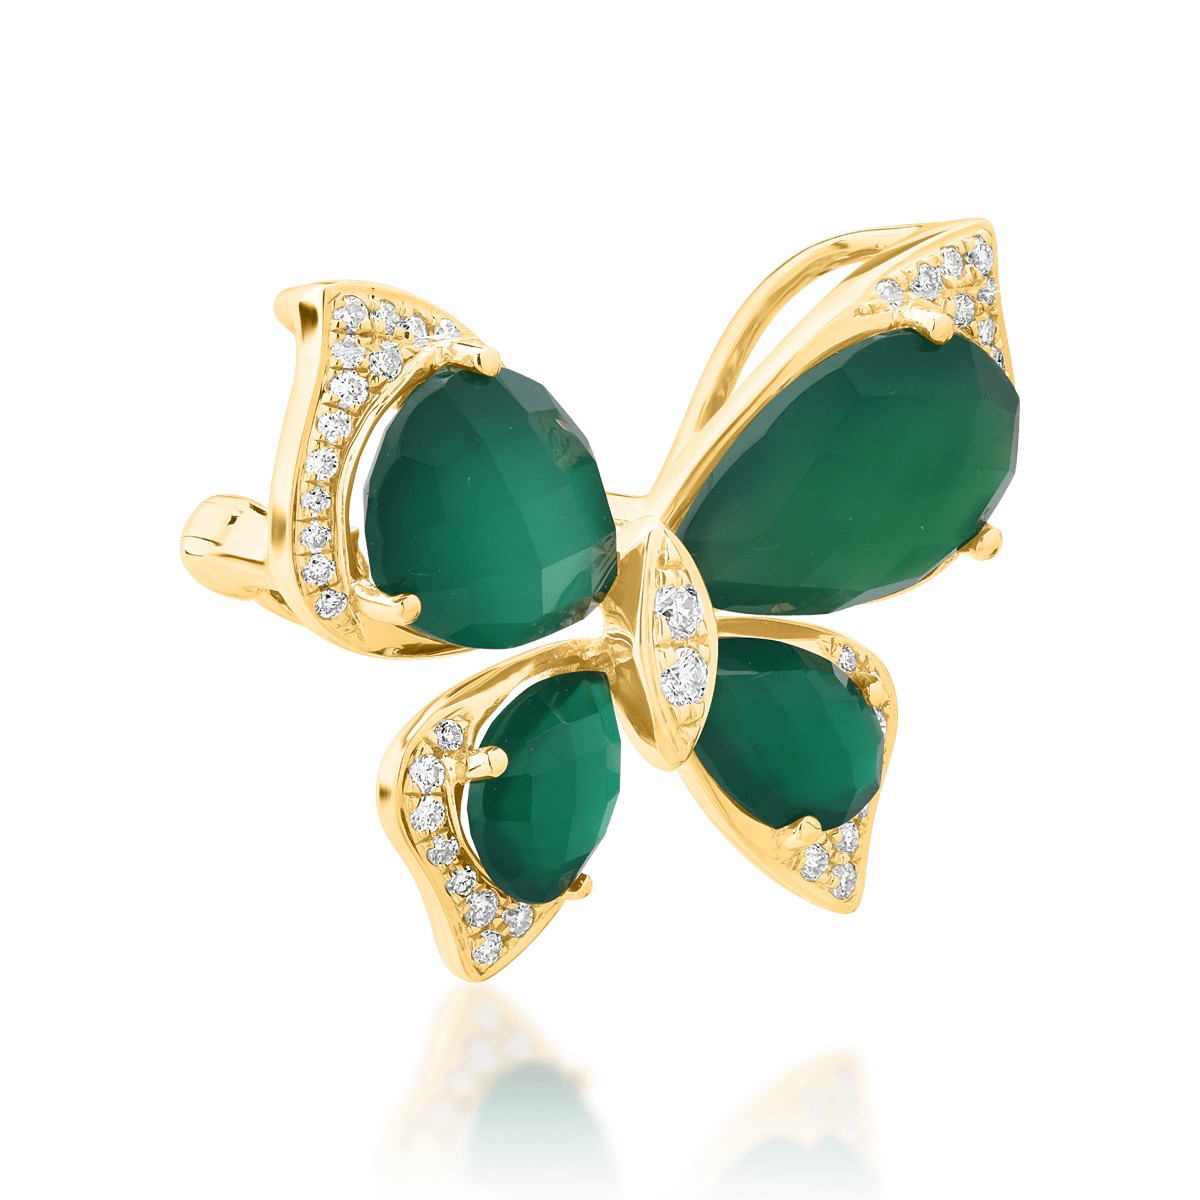 18K yellow gold brooch with 5.4ct green agate and 0.21ct diamonds